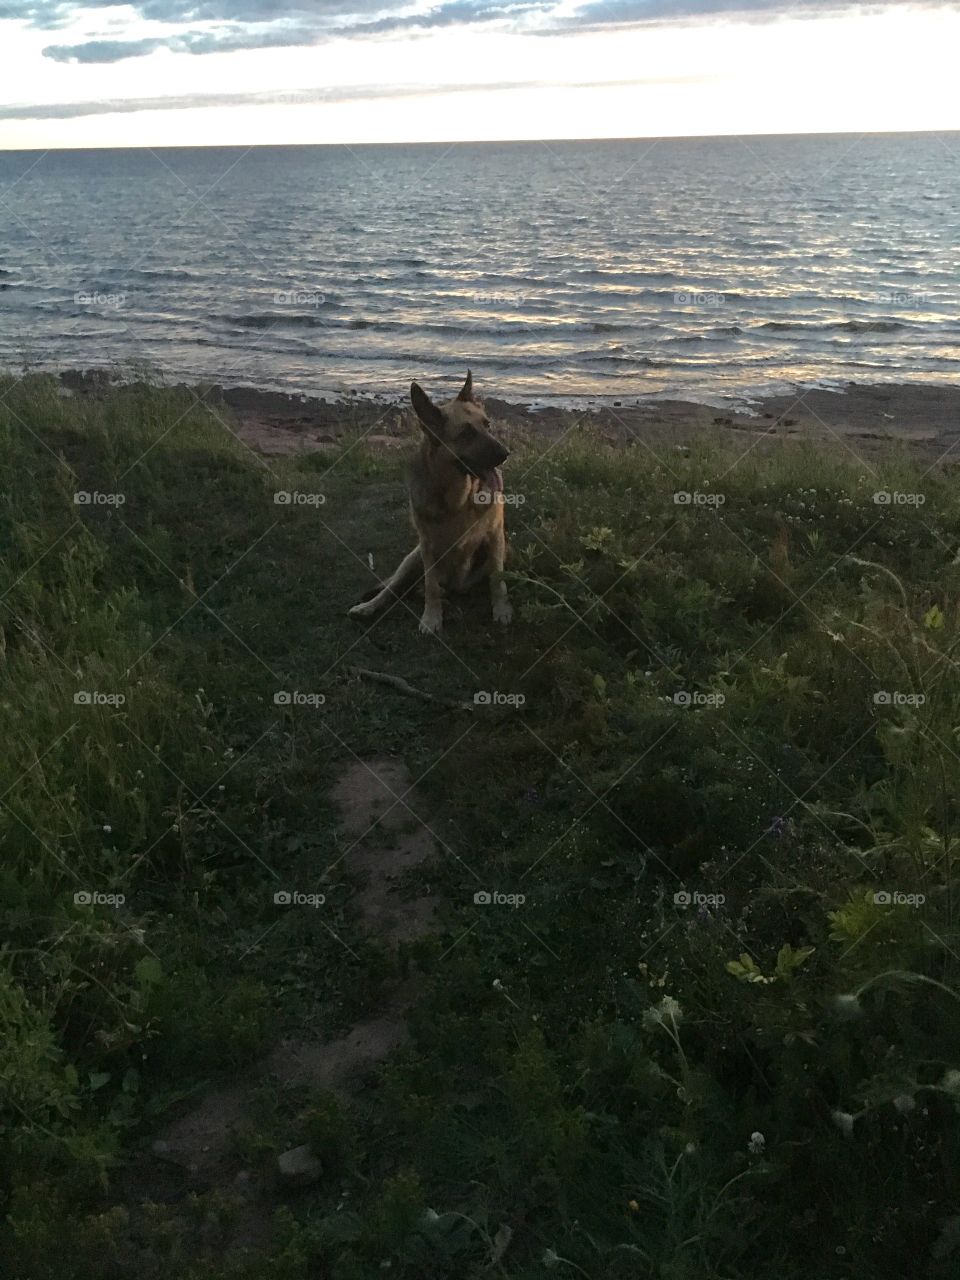 She sits at sunset waiting to play fetch